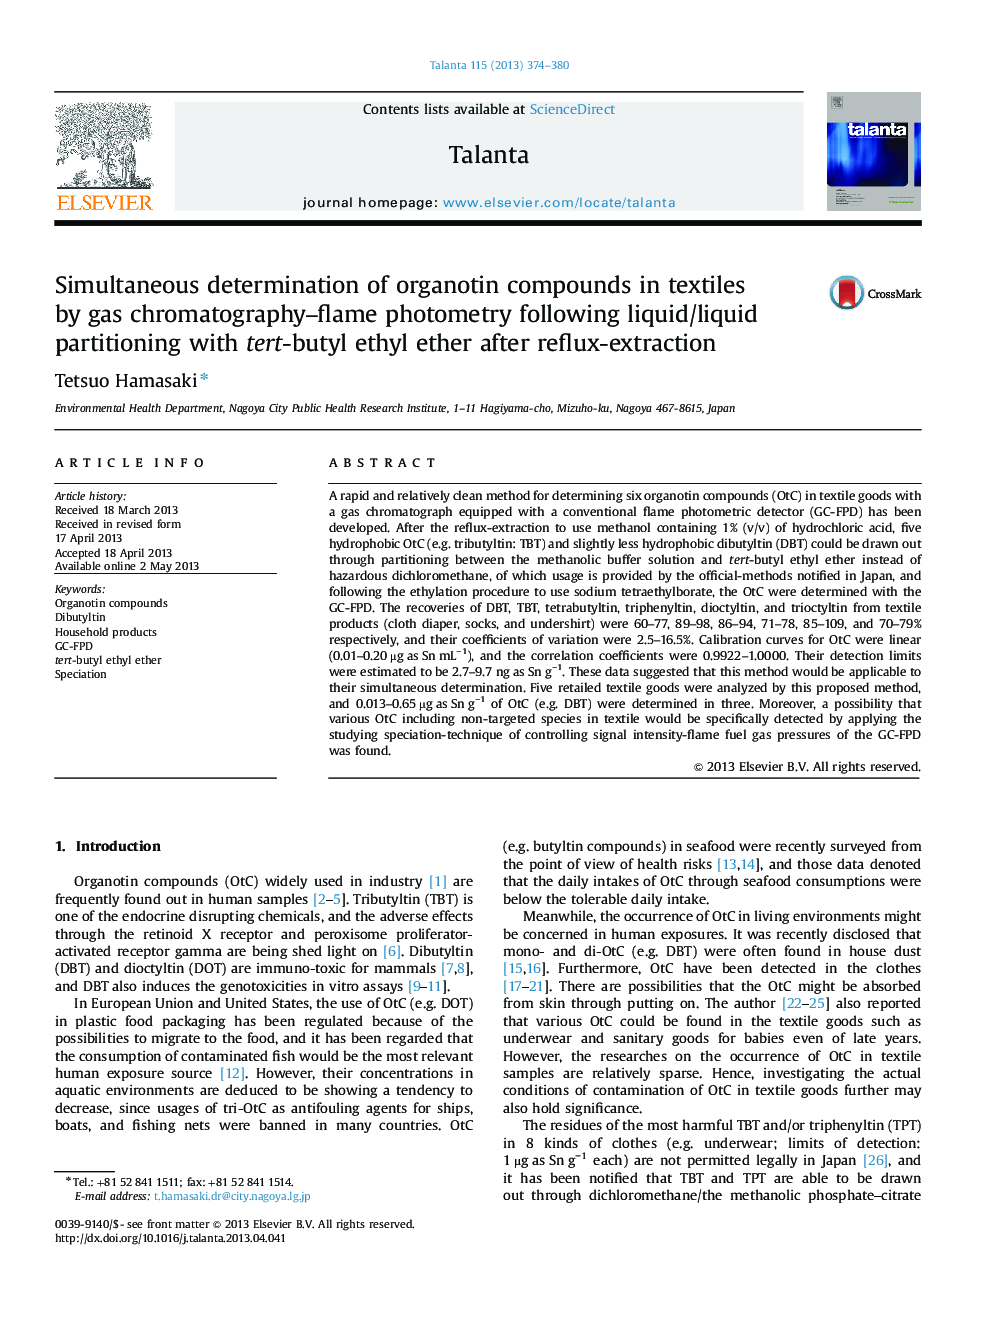 Simultaneous determination of organotin compounds in textiles by gas chromatography-flame photometry following liquid/liquid partitioning with tert-butyl ethyl ether after reflux-extraction